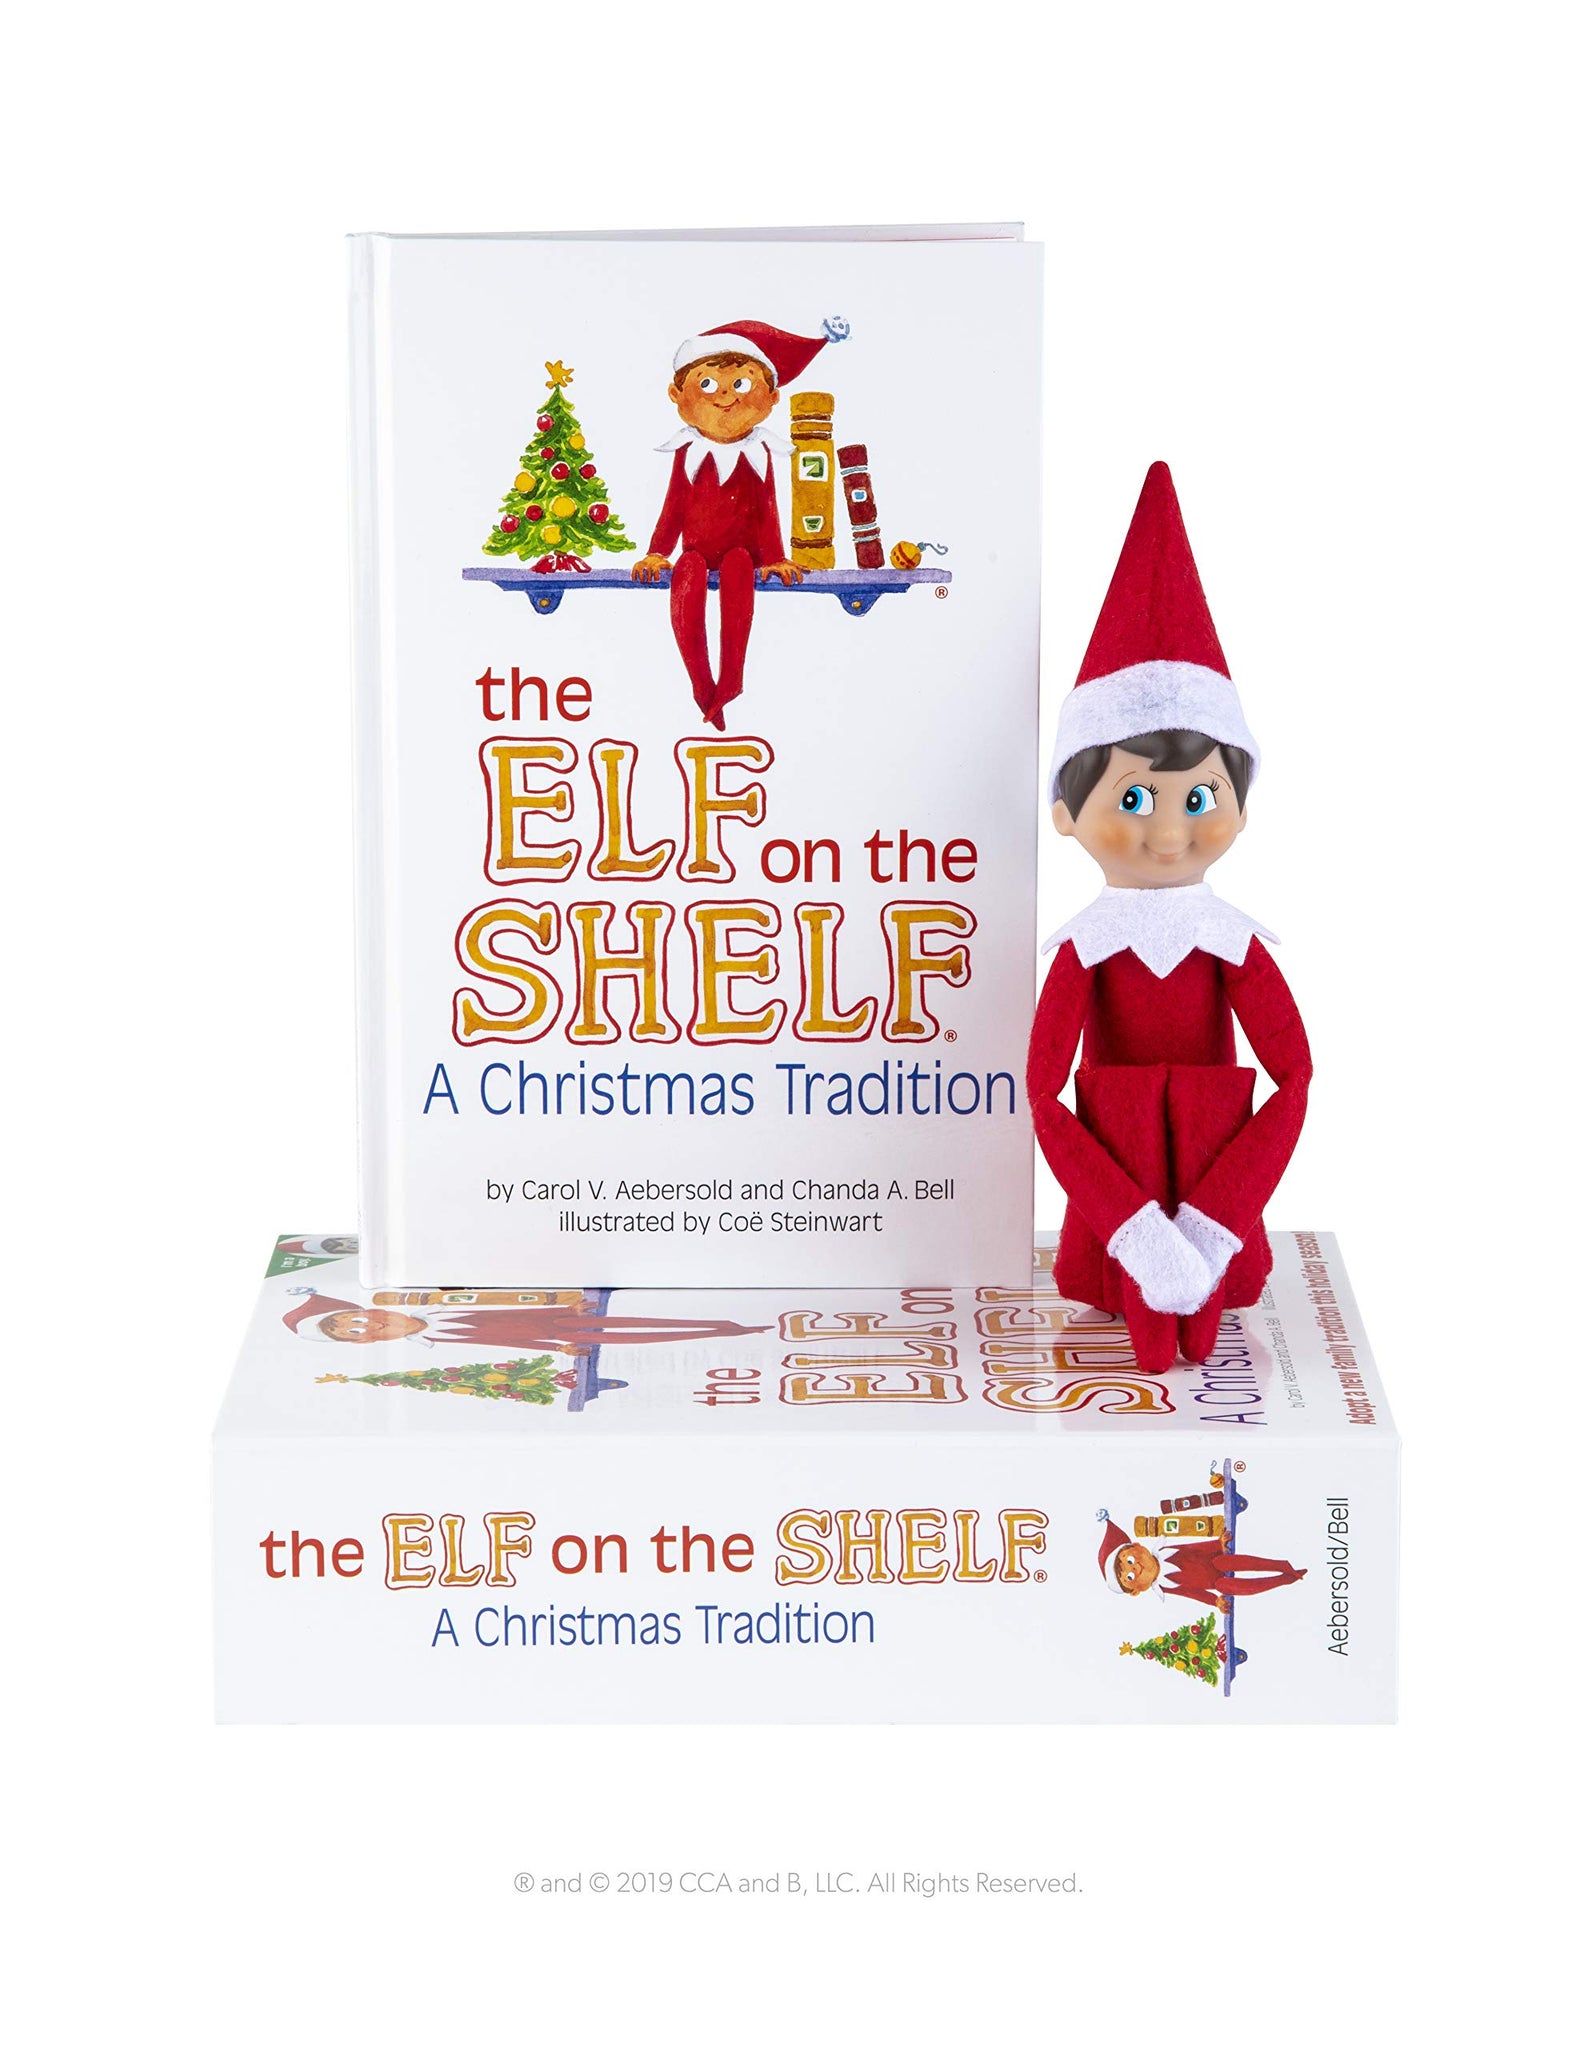 Elf on the Shelf : A Christmas Tradition Blue-Eyed Boy Light Tone Scout Elf - Elf and book included.